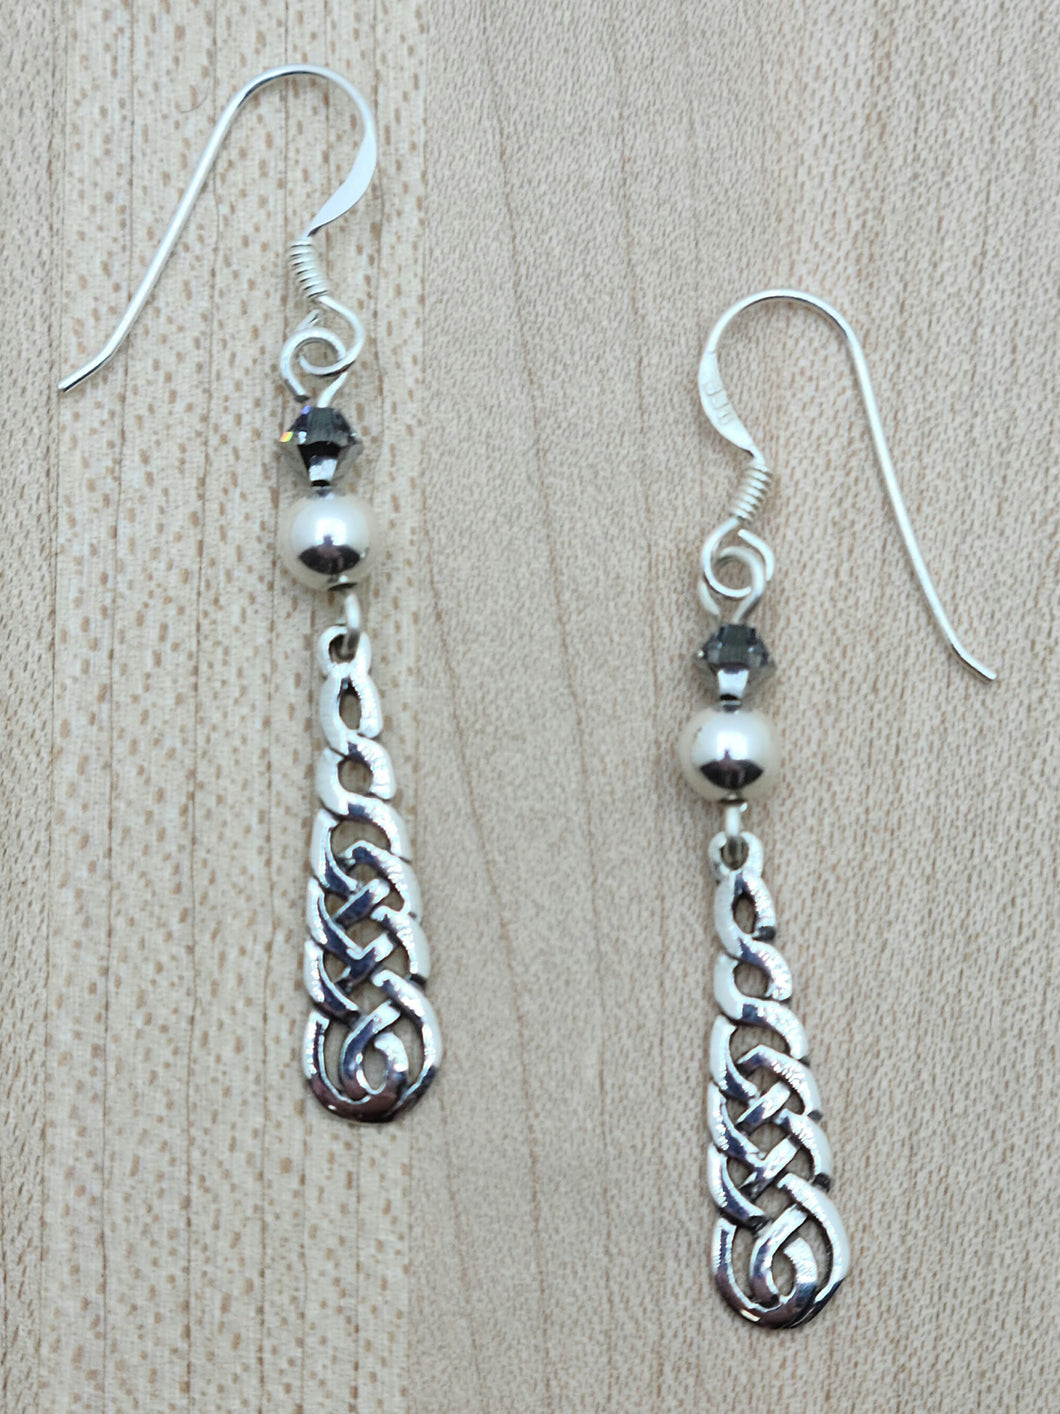 Silver crystals & crystal pearls host sterling silver endless weave pendants.